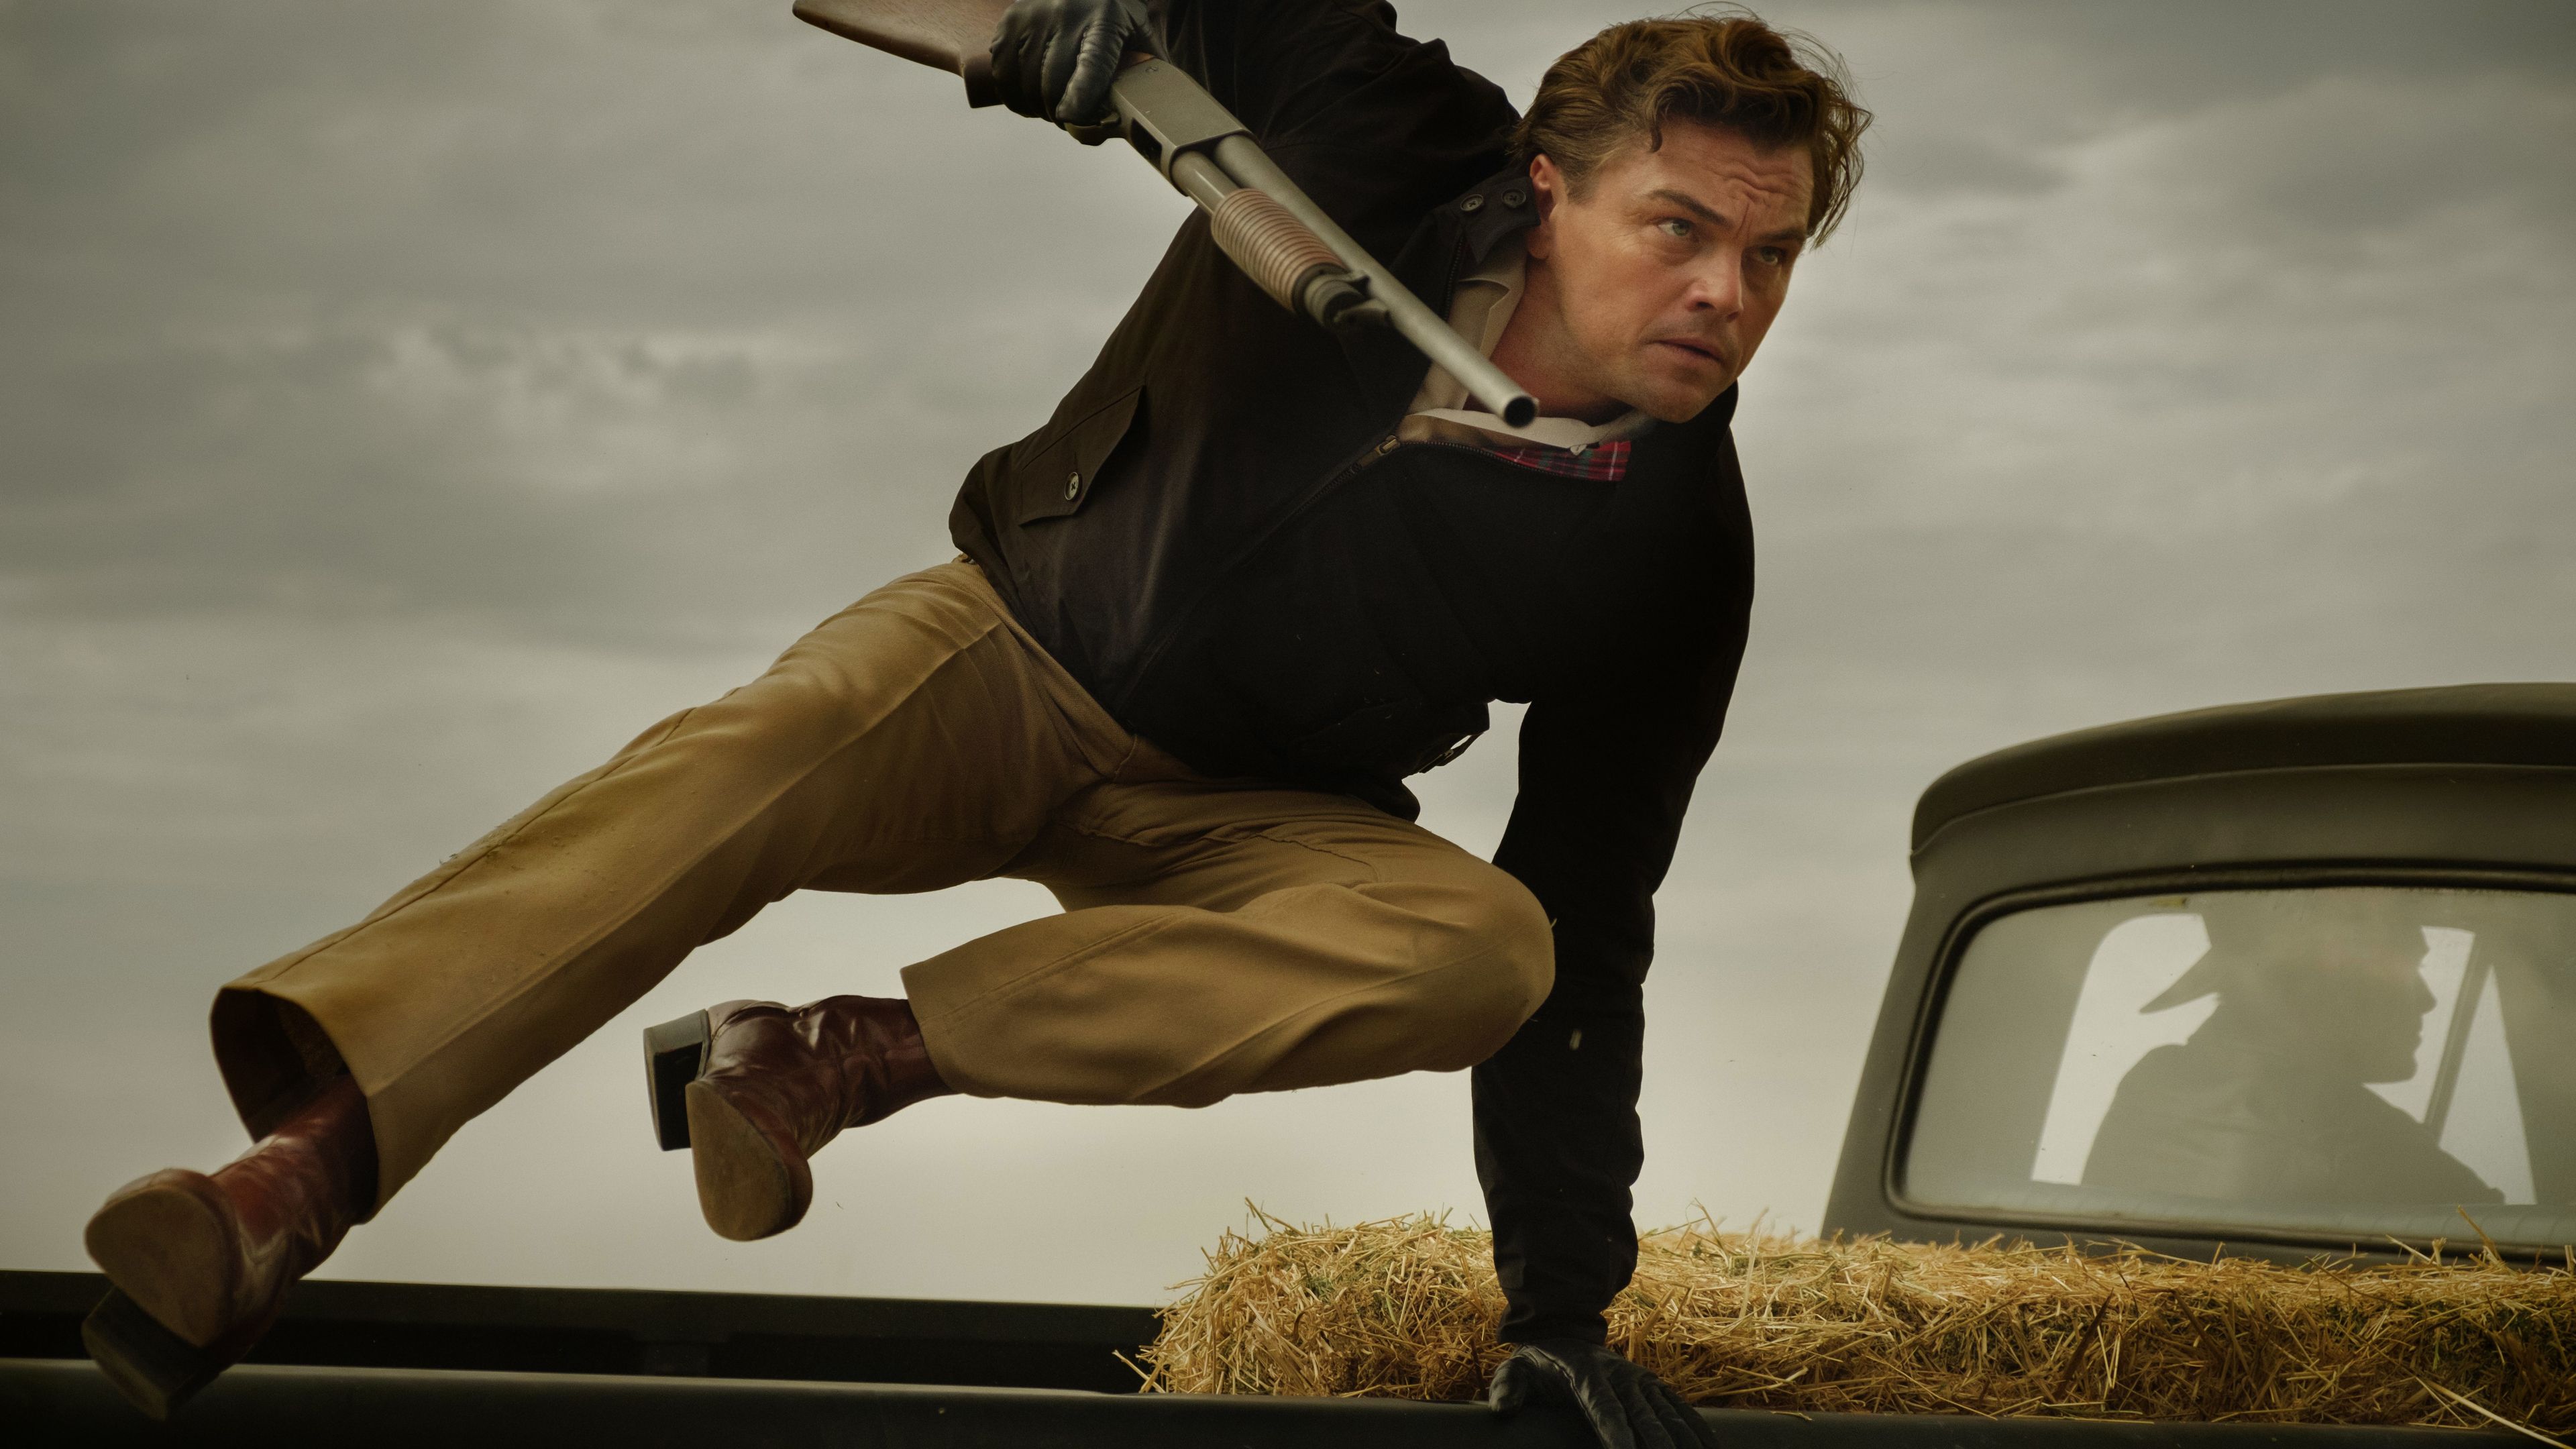 Wallpaper 4k Leonardo DiCaprio In Once Upon A Time In Hollywood 4k 2019 Movies Wallpaper, 4k Wallpaper, Hd Wallpaper, Leonardo Dicaprio Wallpaper, Male Celebrities Wallpaper, Movies Wallpaper, Once Upon A Time In Hollywood Wallpaper